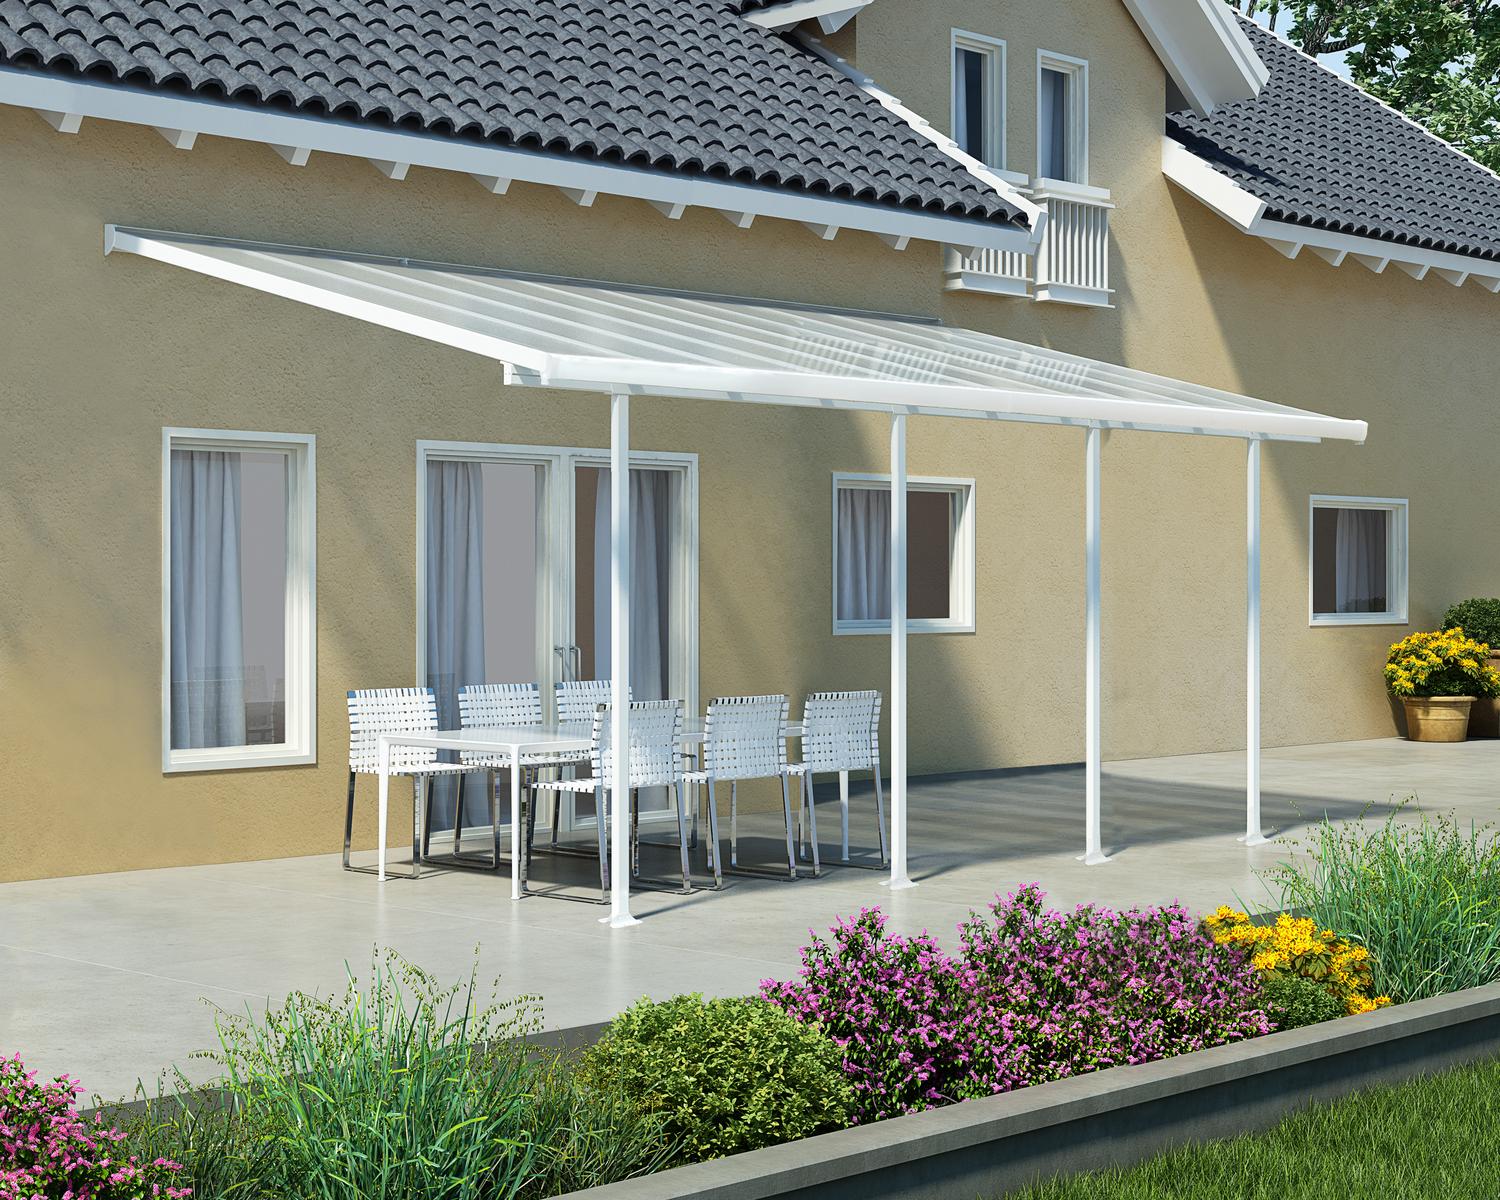 Patio Cover 10 ft. x 20 ft. Aluminium White with polycarbonate roof panels, attached to the house to protect patio furniture